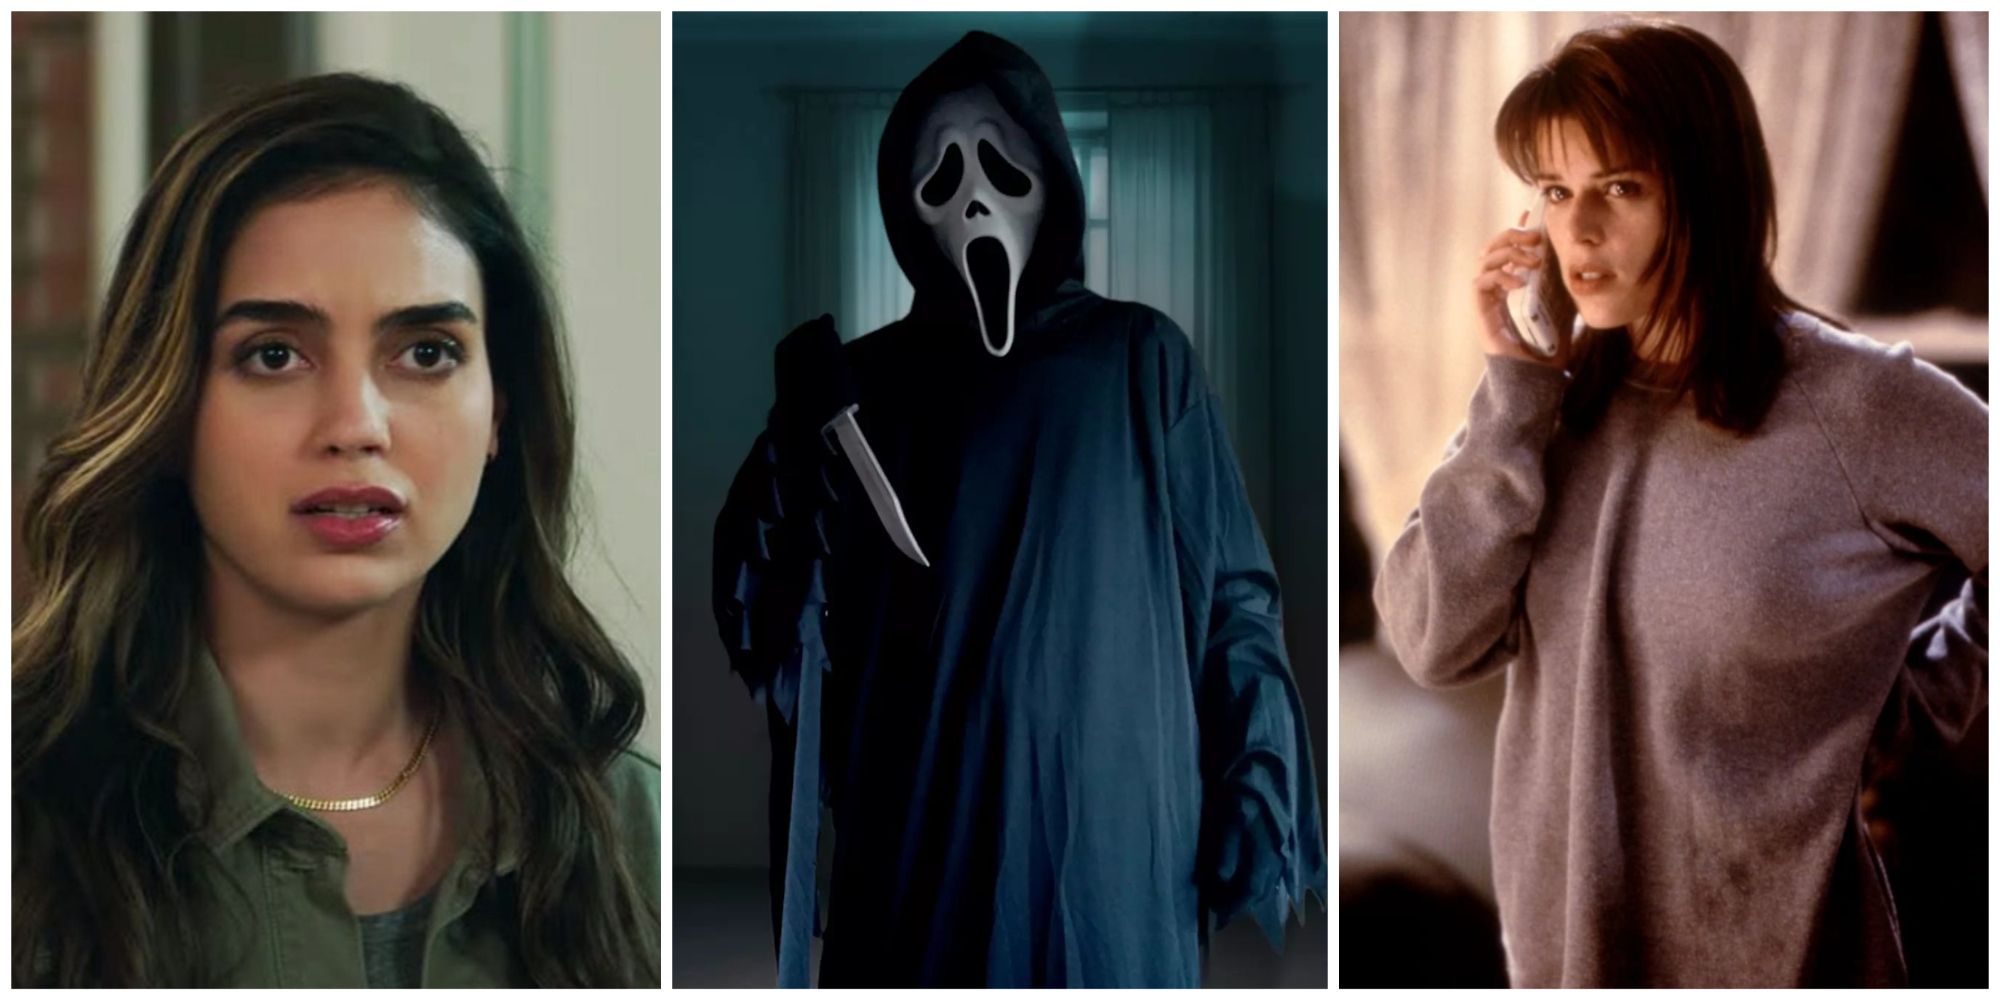 A collage featuring Scream characters Sam Carpenter, Sidney Prescott, and Ghostface